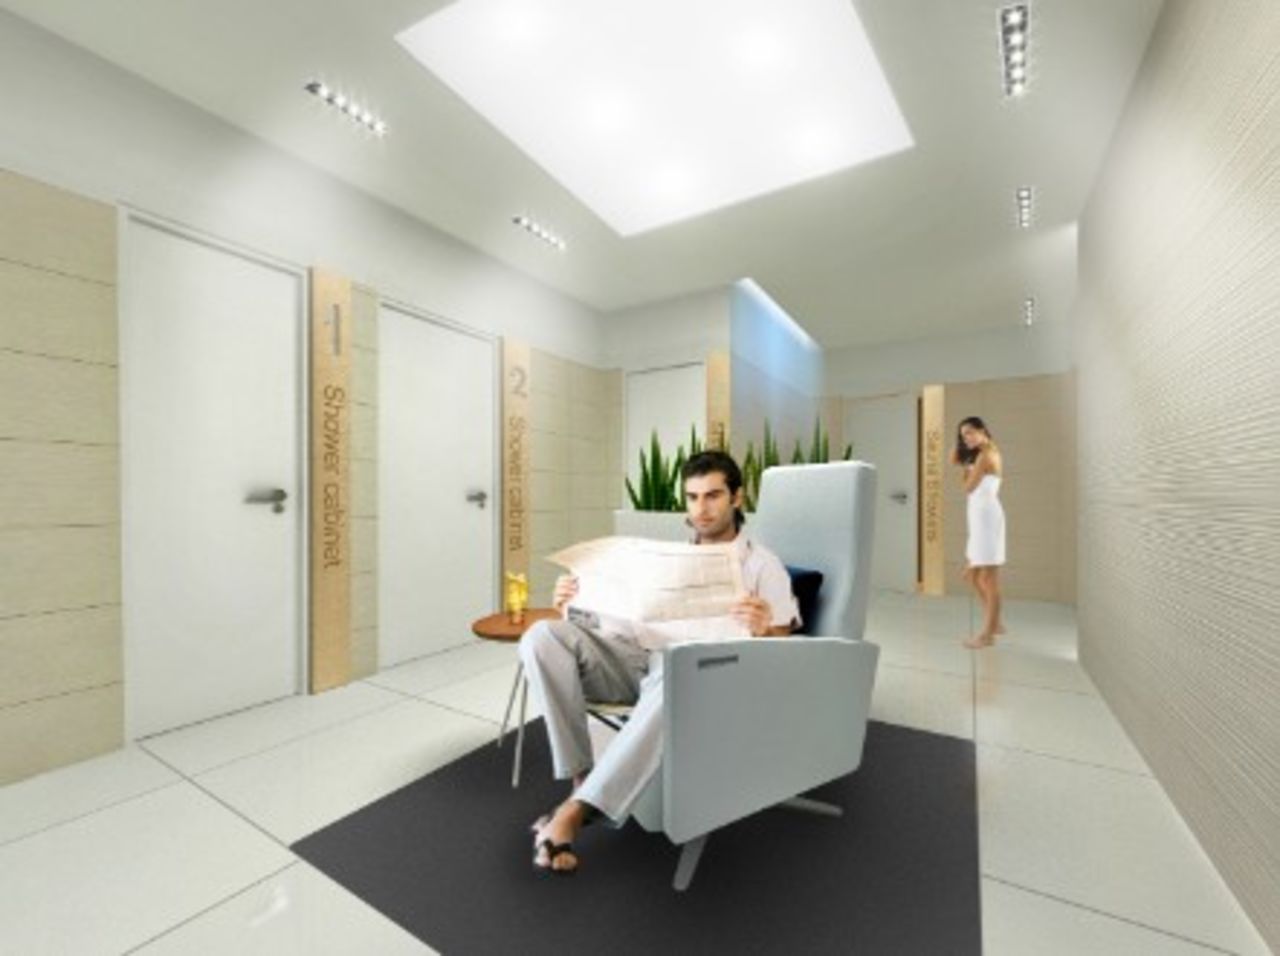 The airline has added new shower suites, too. Courtesy Finnair.